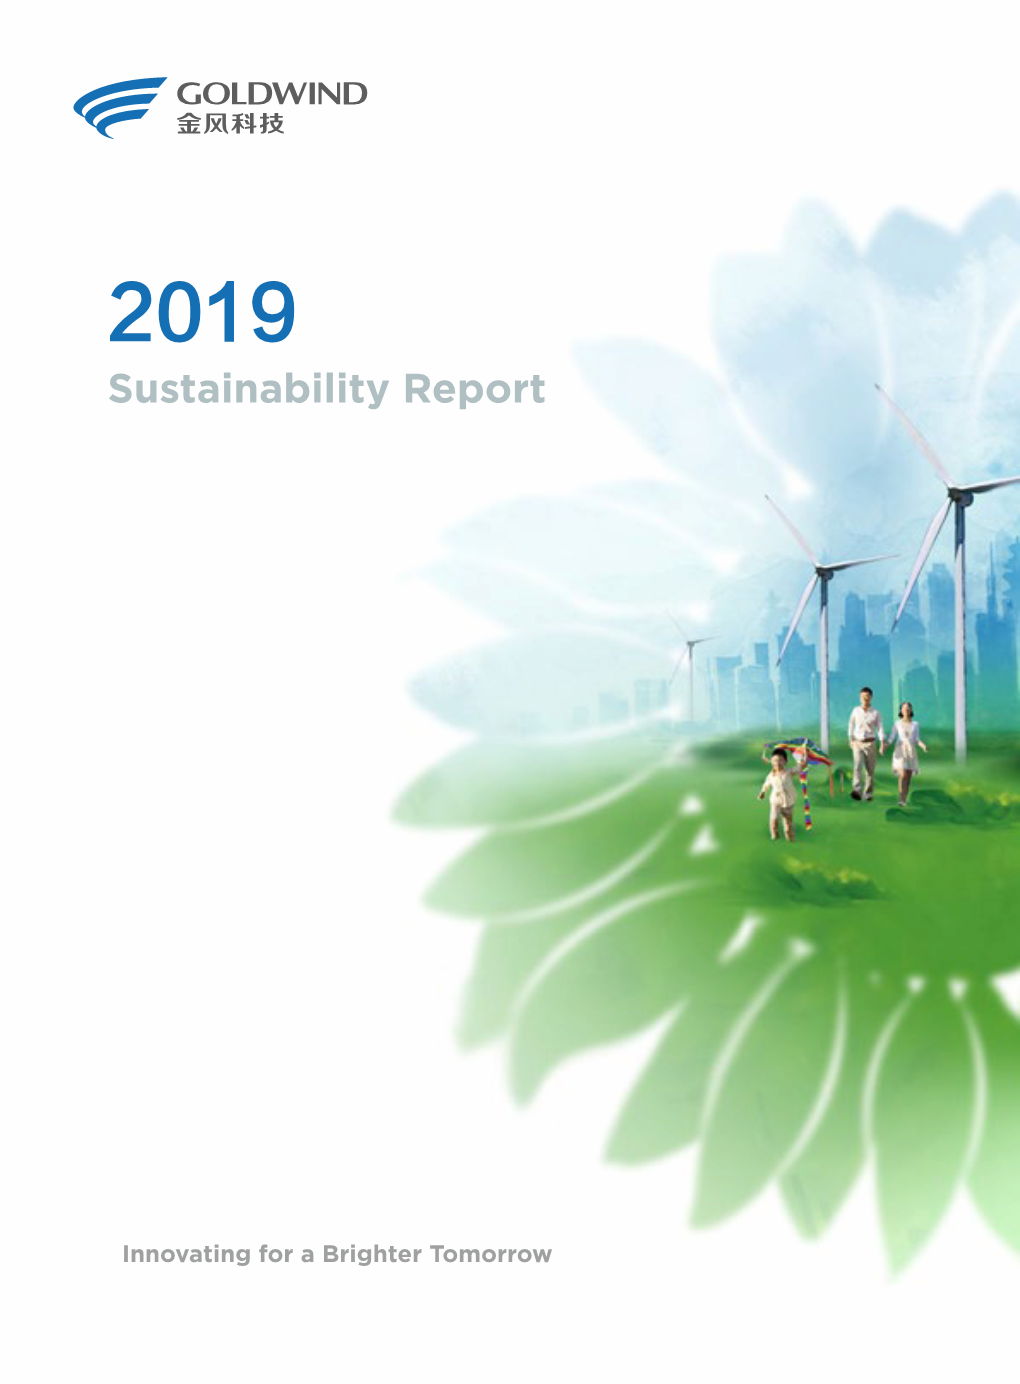 2019 Global Sustainability Report